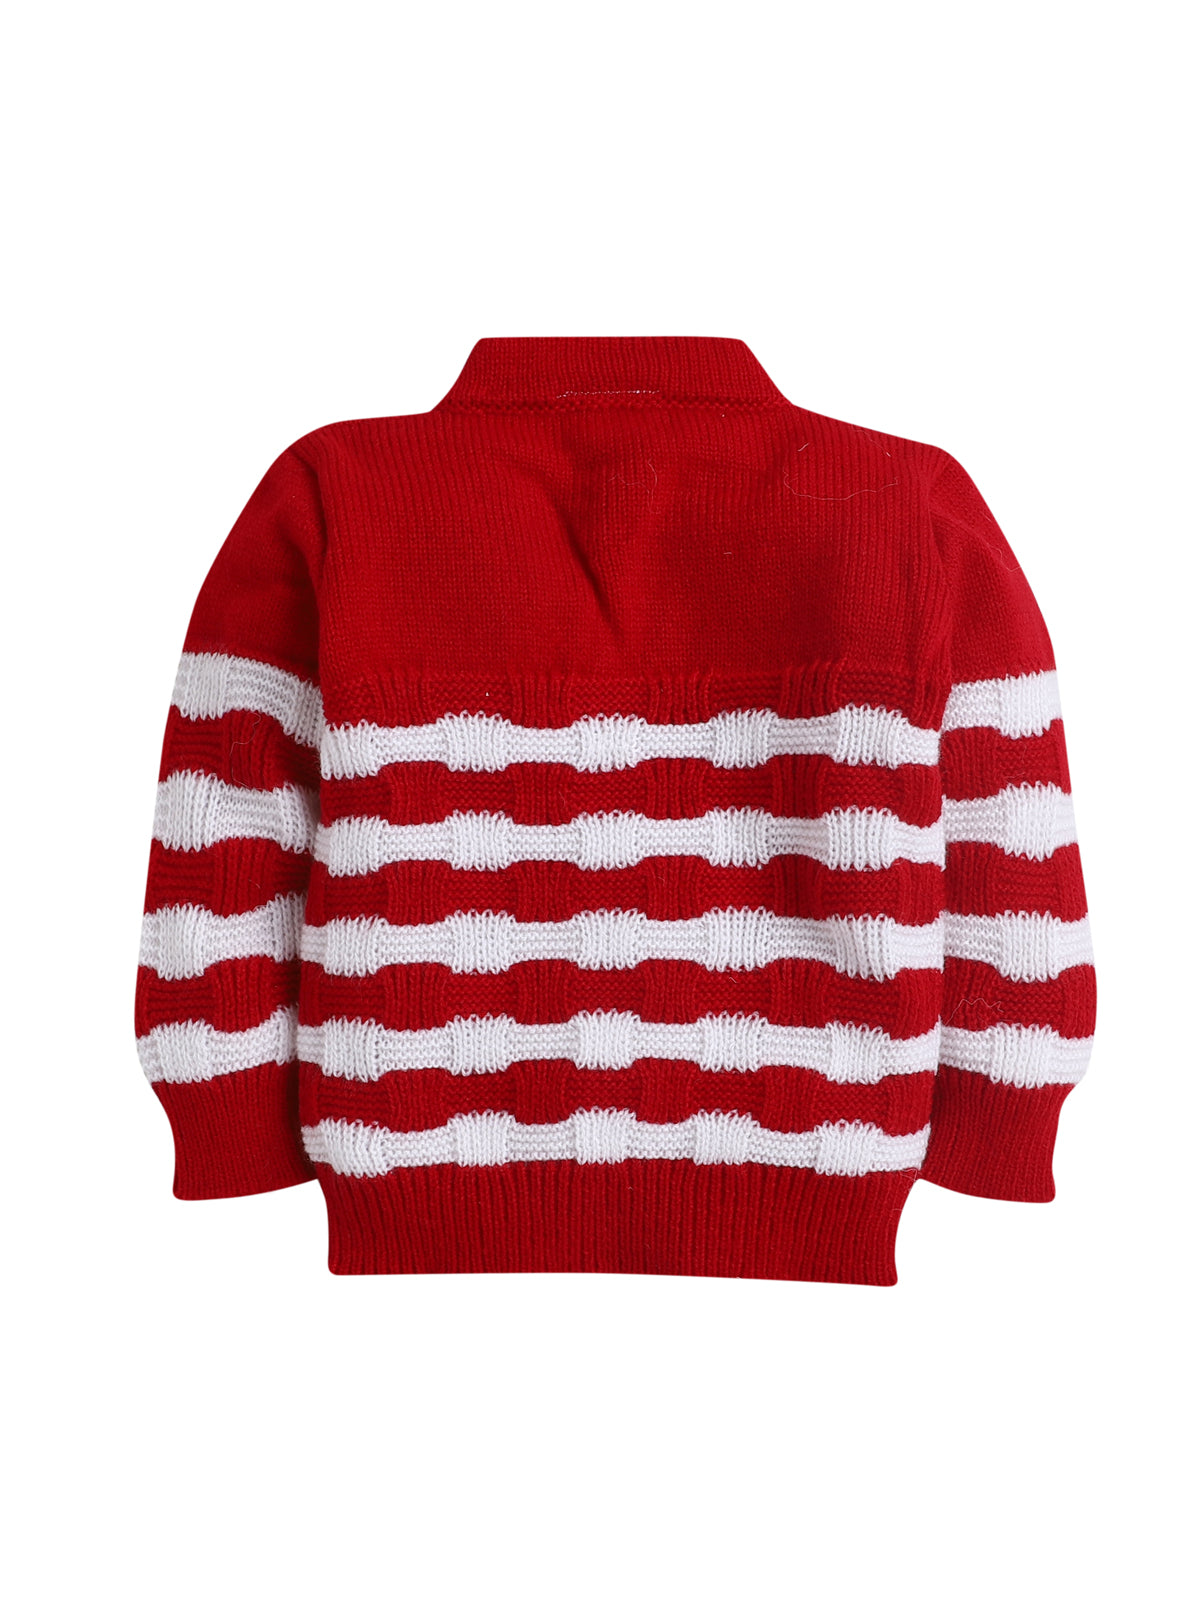 Full sleeves front open Red with White stripe color sweater with matching cap and socks for baby